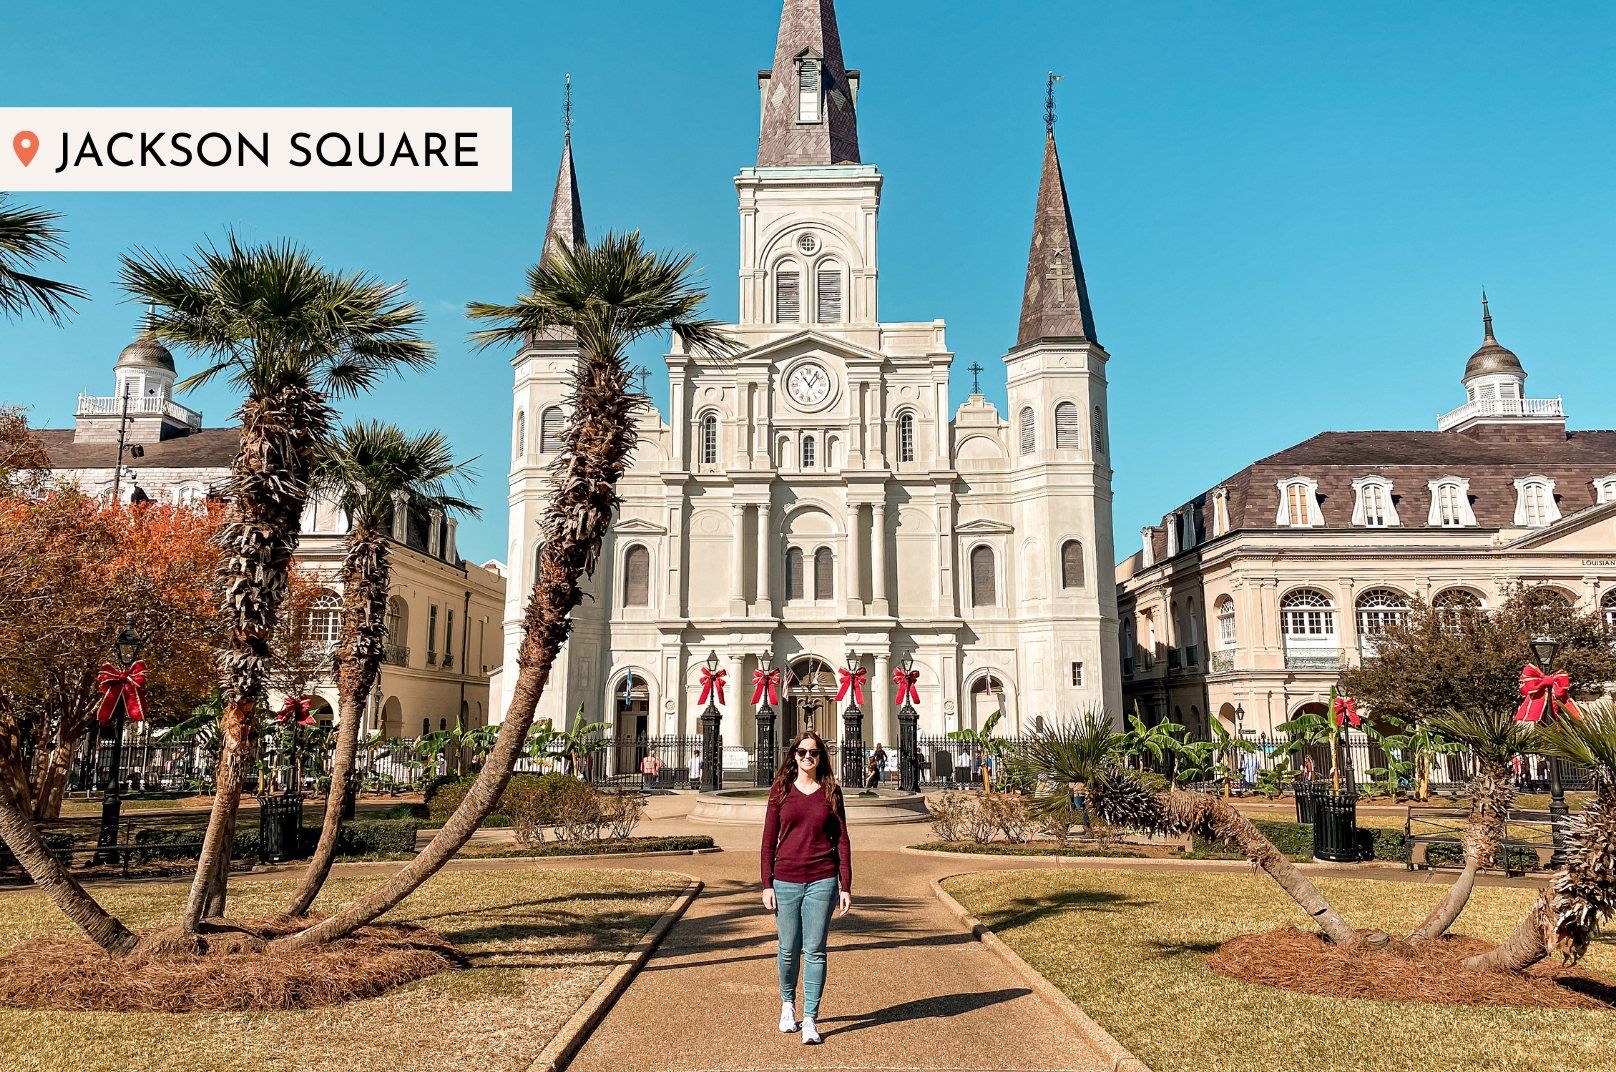 pictures of the French Quarter in New Orleans